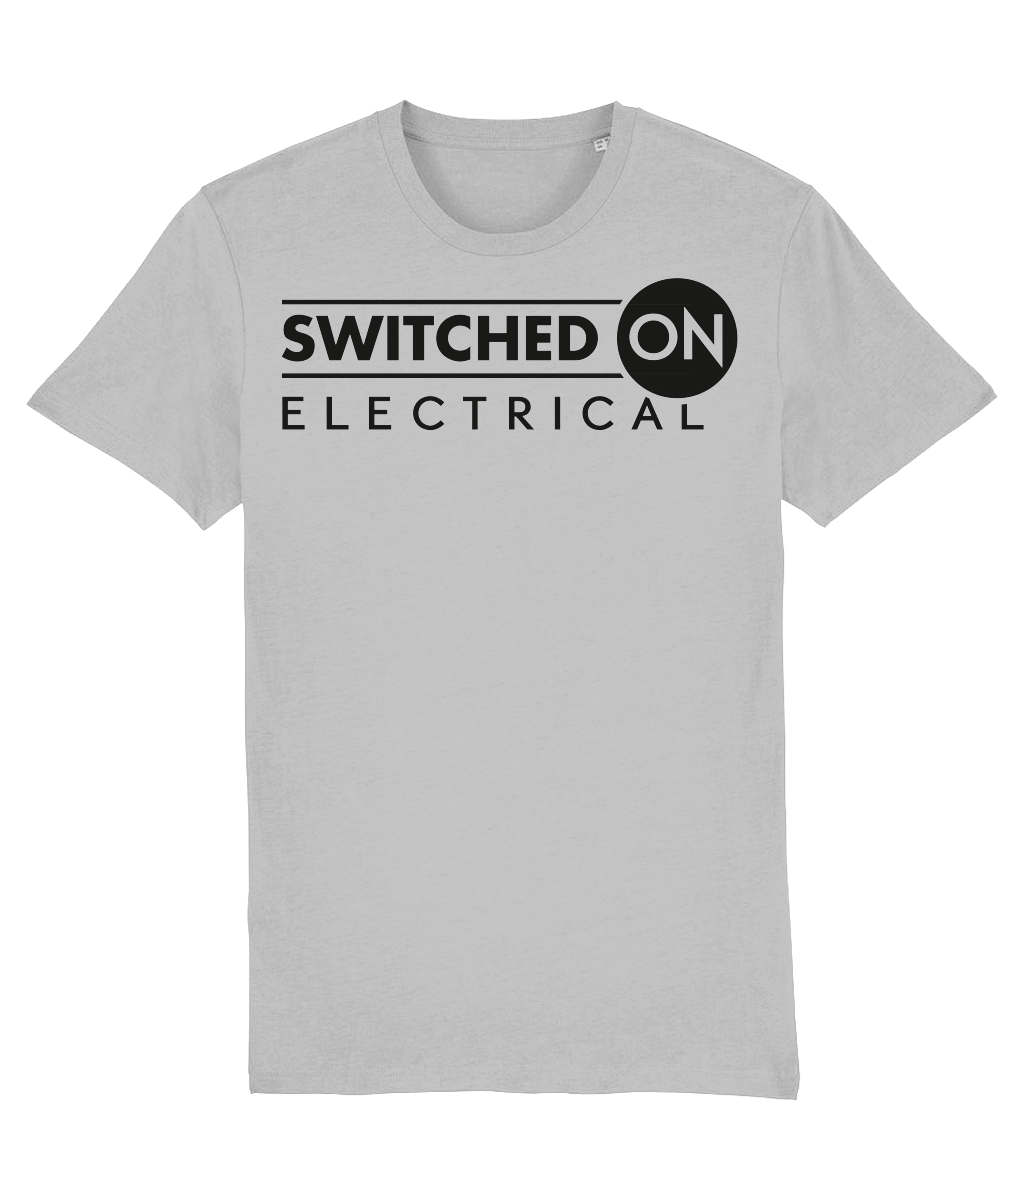 Switched On Electrical - Teeshirt - Black Print